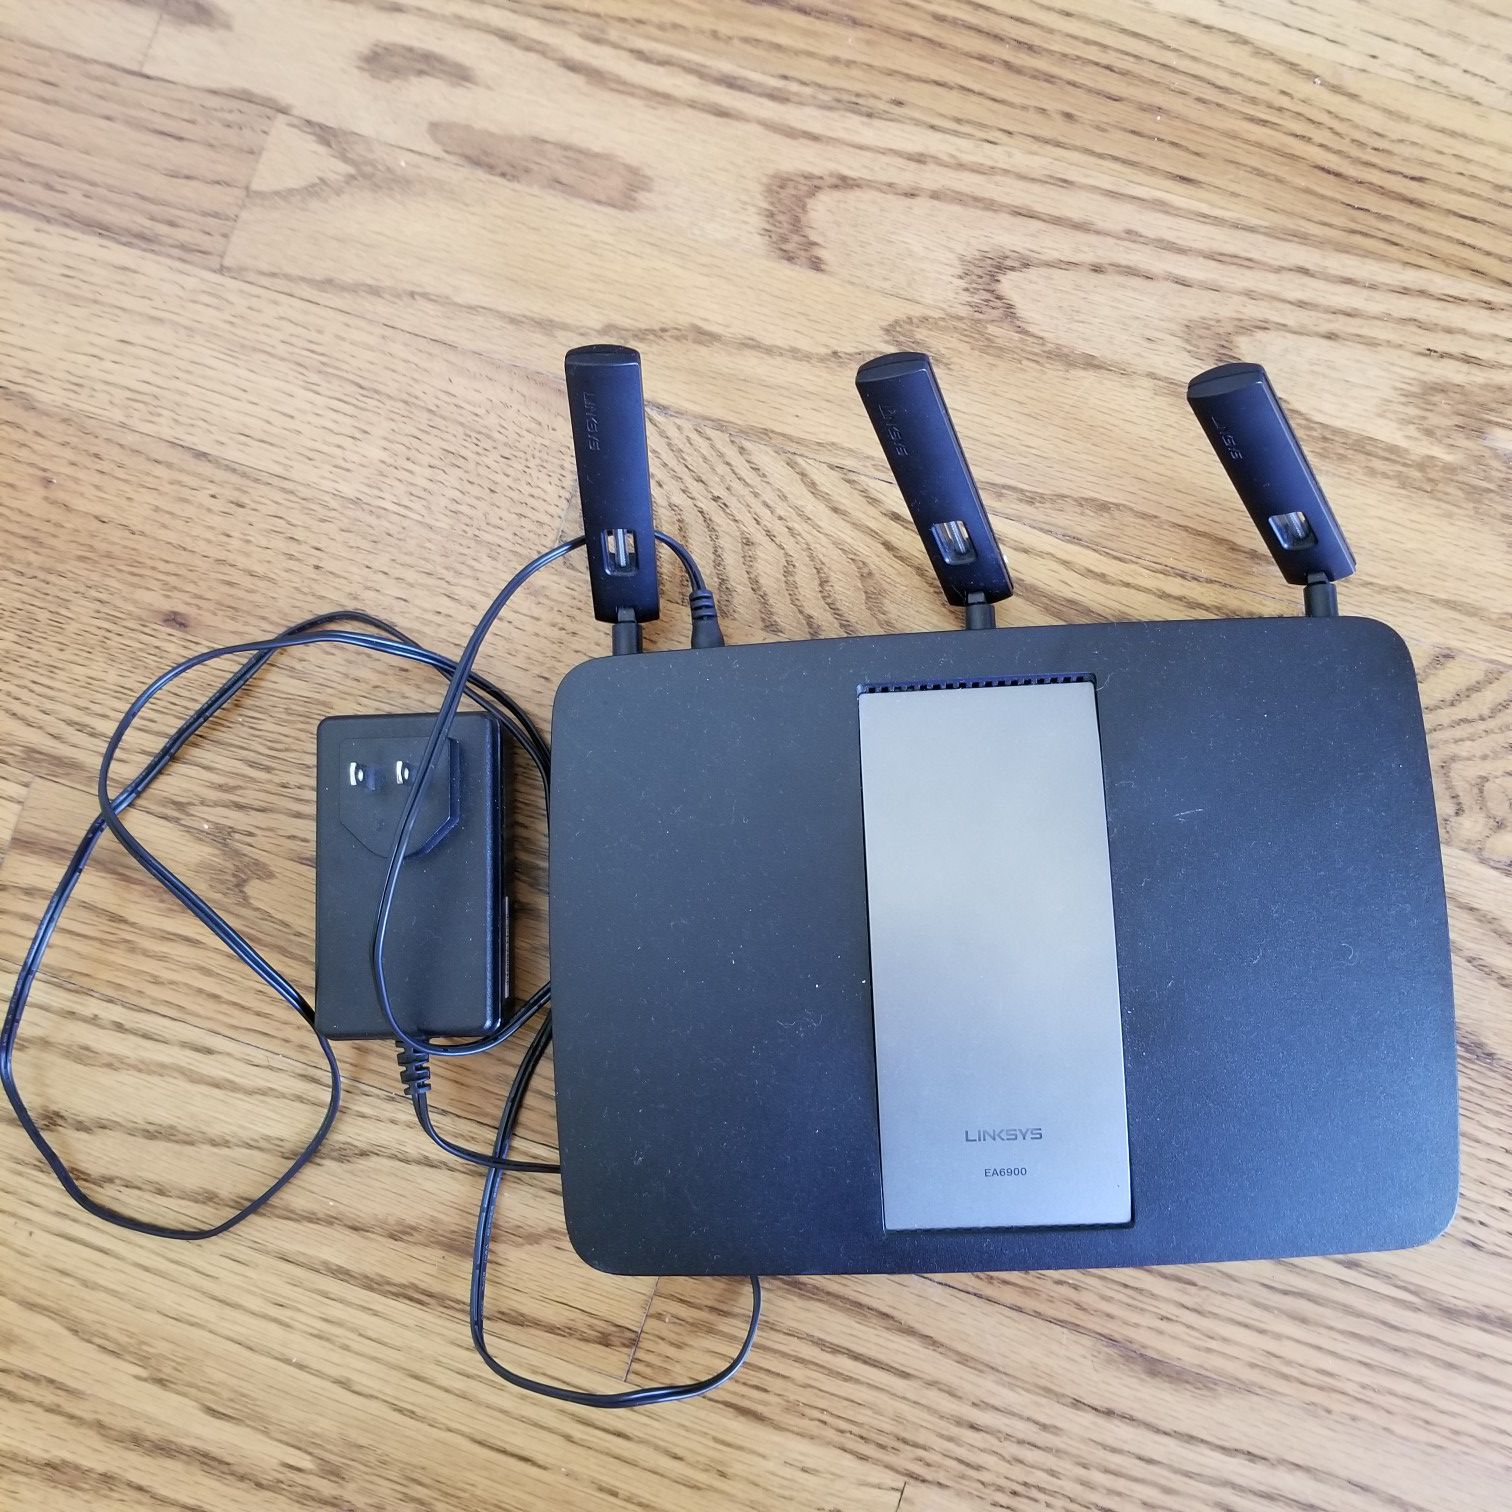 Linksys EA6900 wifi router